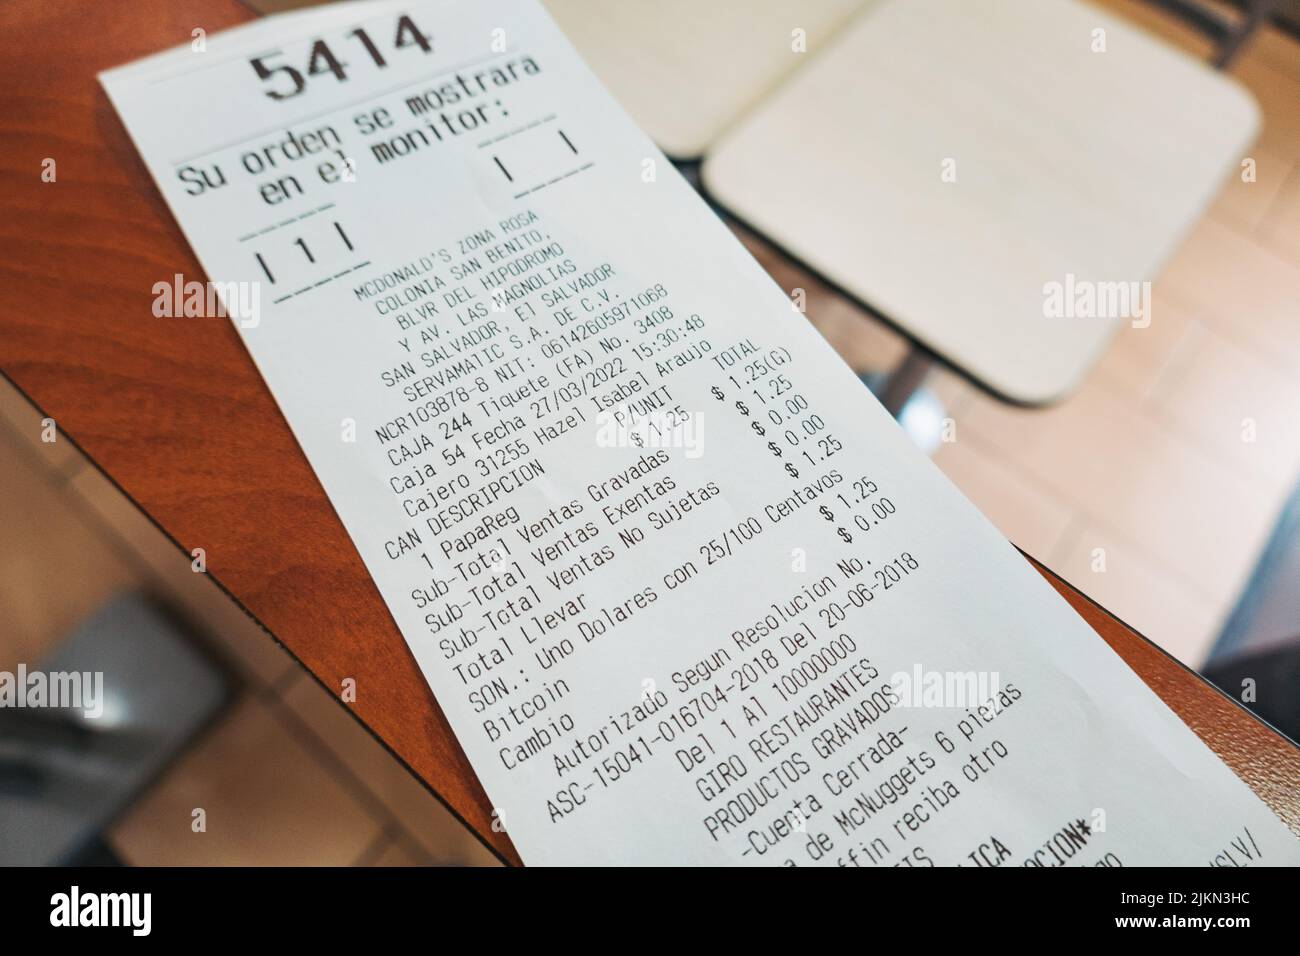 A receipt for food paid for with Bitcoin Lightning Network at McDonald's restaurant in El Salvador Stock Photo